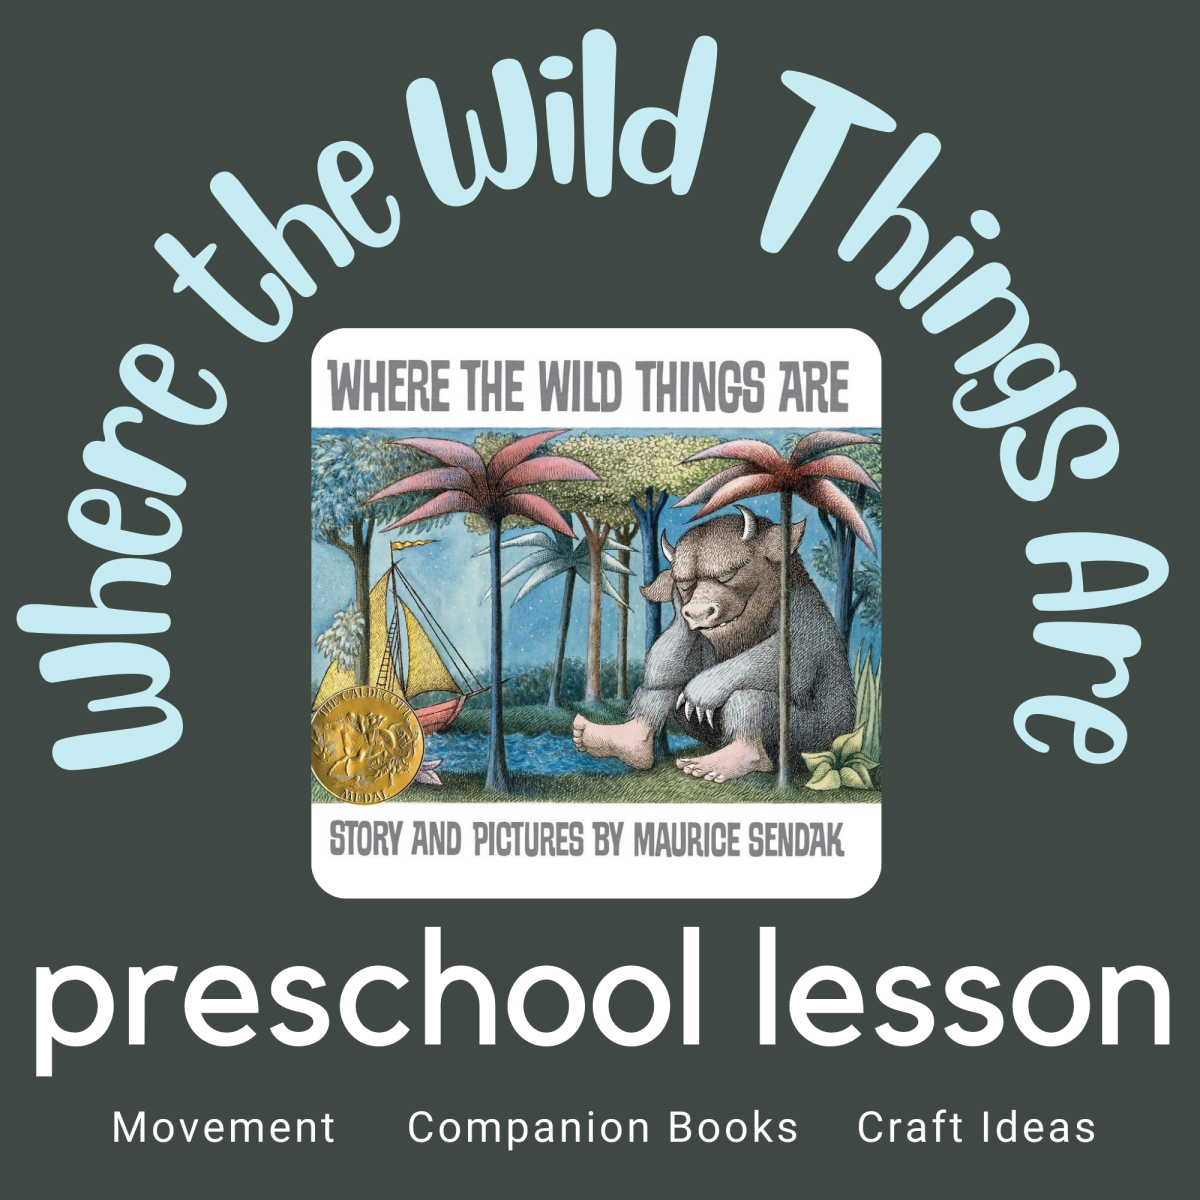 Where the Wild Things Are Children's Book Review and Pre-K Lesson Plan